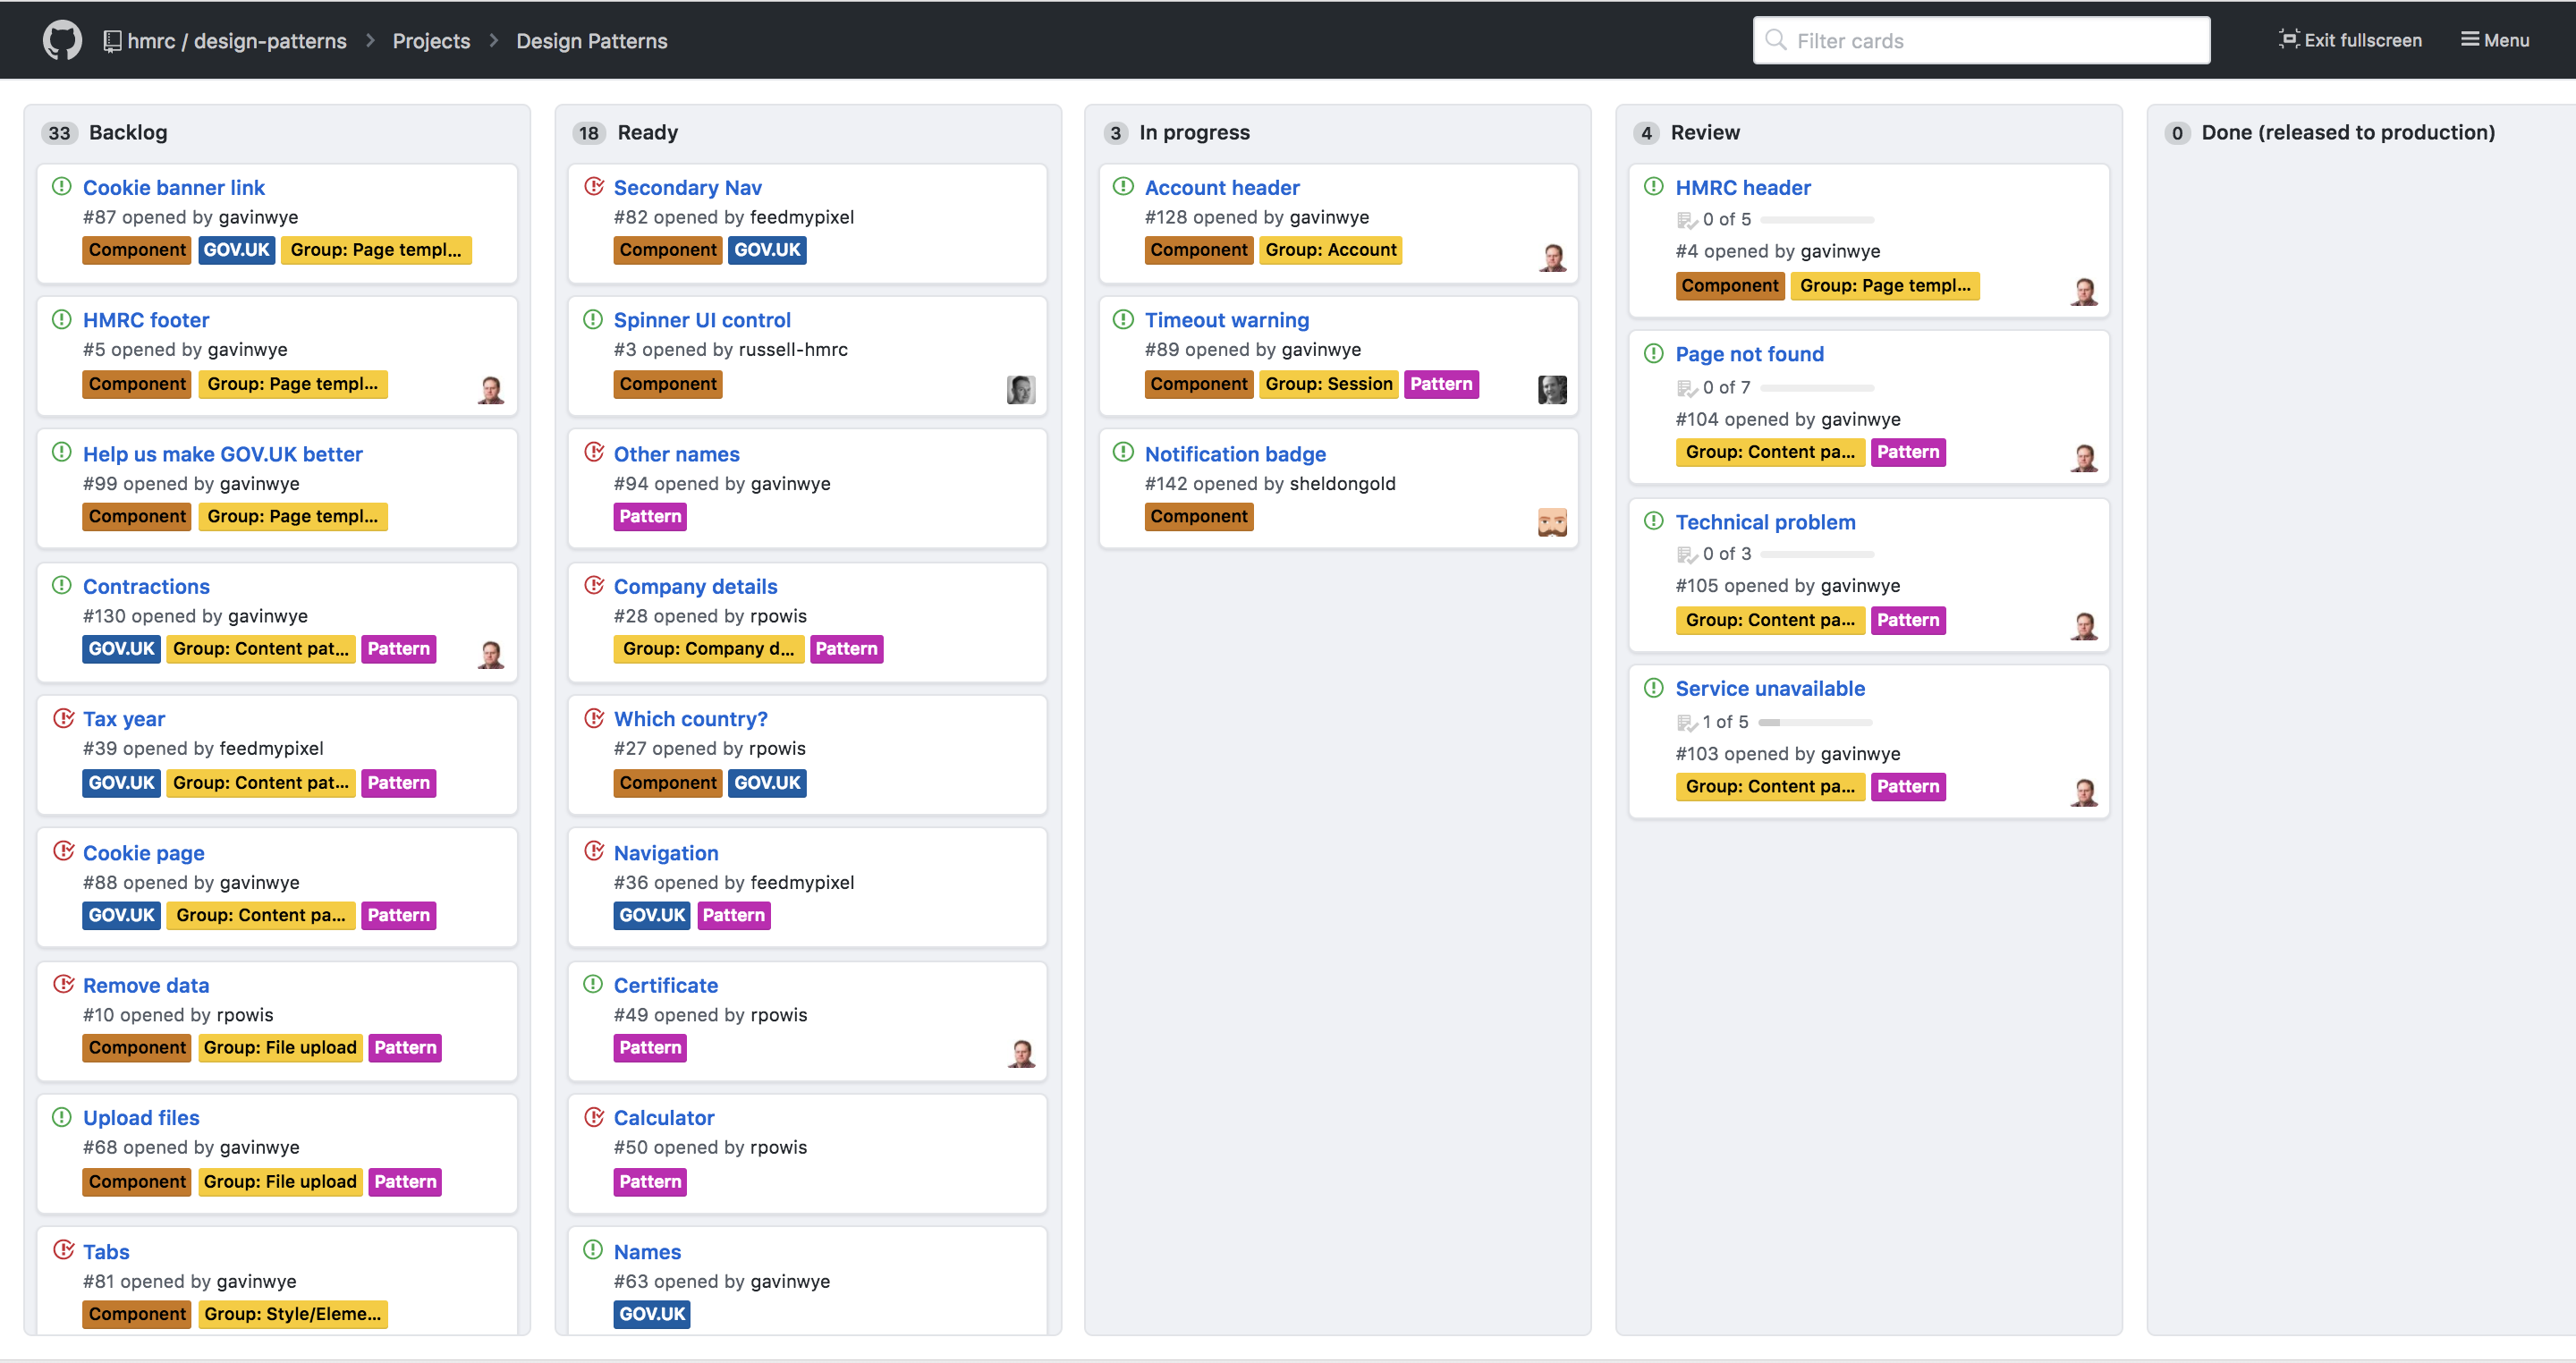 GitHub project board showing the backlog